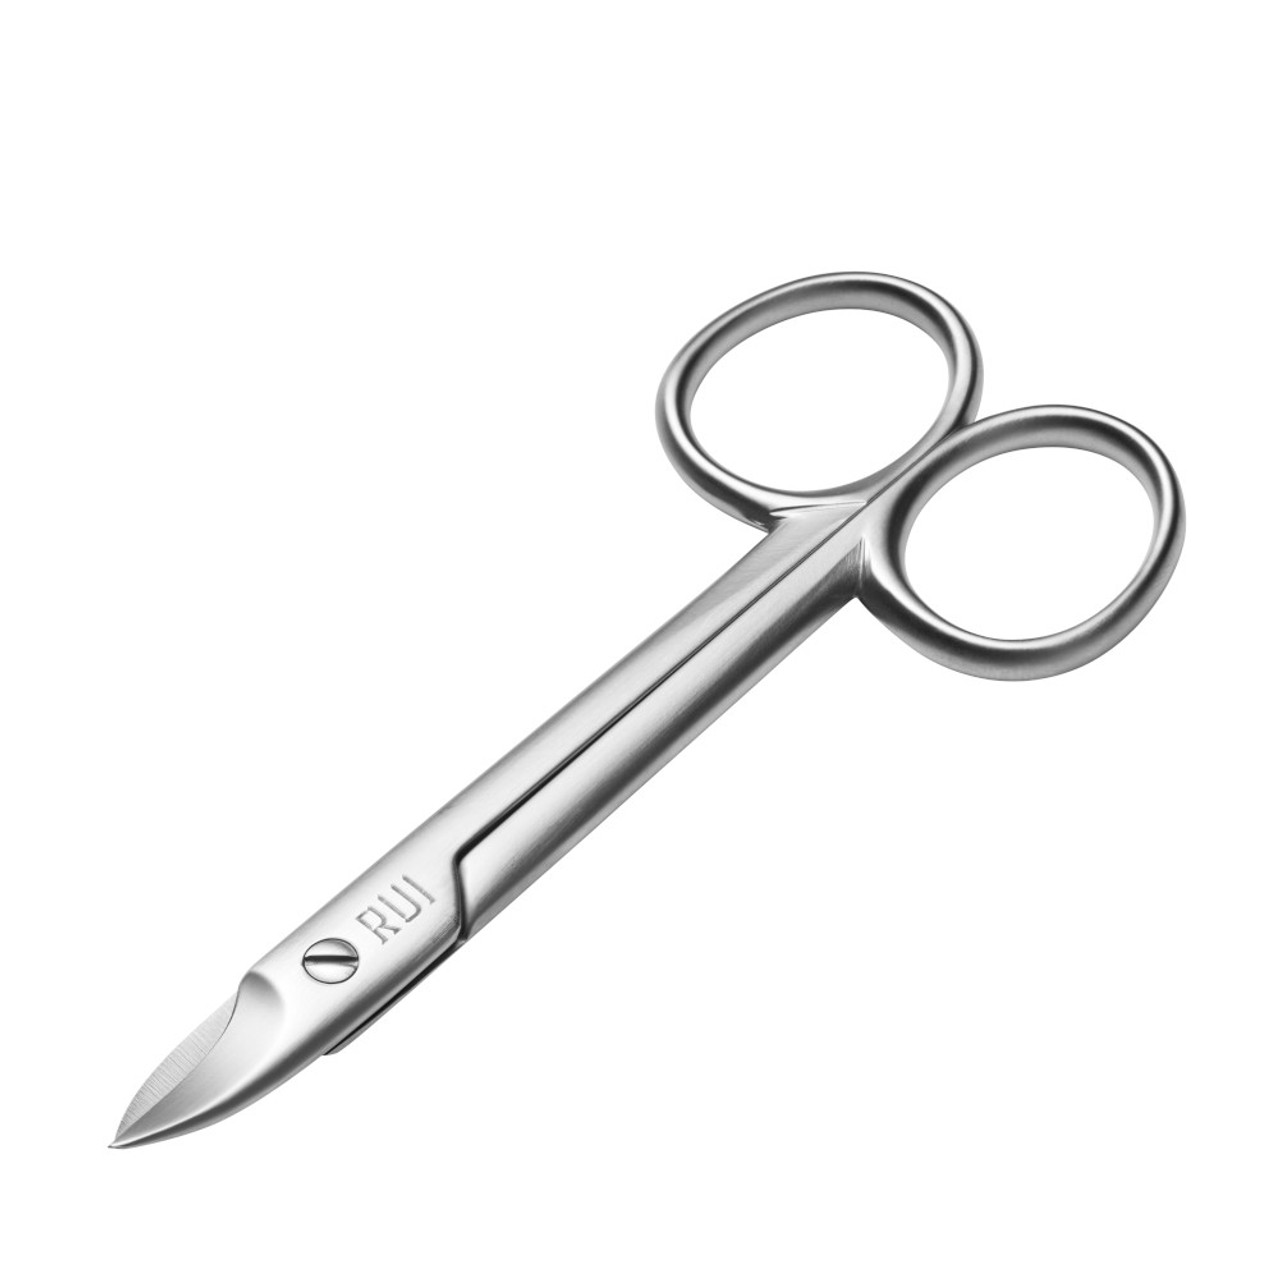 Manicare Toenail Scissors, Precision Blades, Quality Surgical Grade  Japanese Stainless Steel, Trimming Of Tough Nails, Strong Long Lasting  Sharp